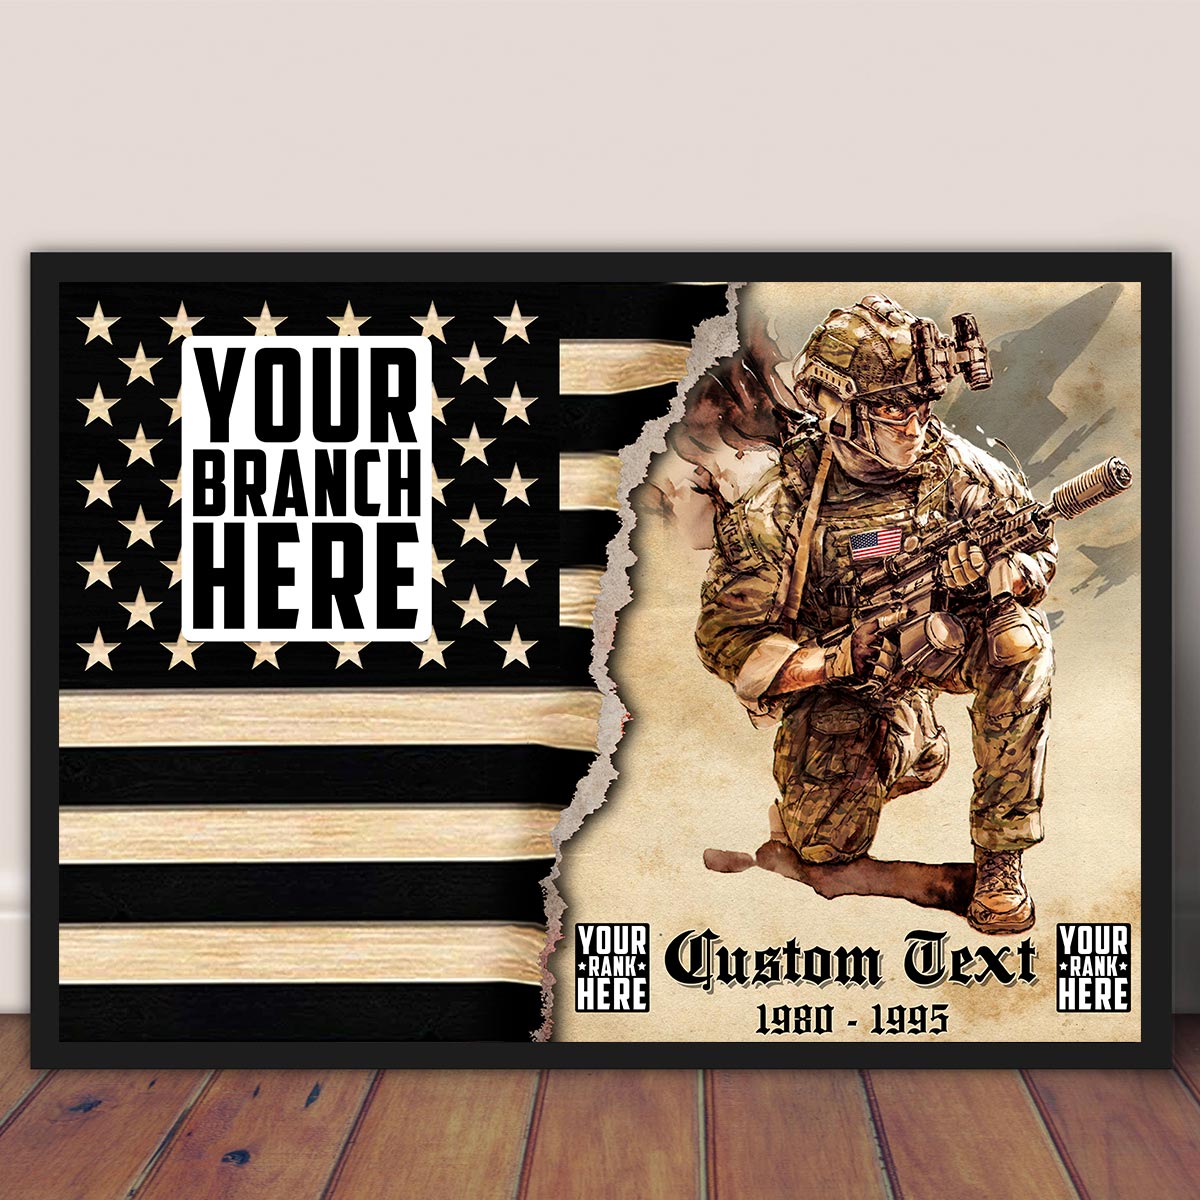 Old Grunge Canvas Paper American Flag Personalized Poster Canvas For Veteran Wall Art Home Decor Gift For Military Veteran H2511